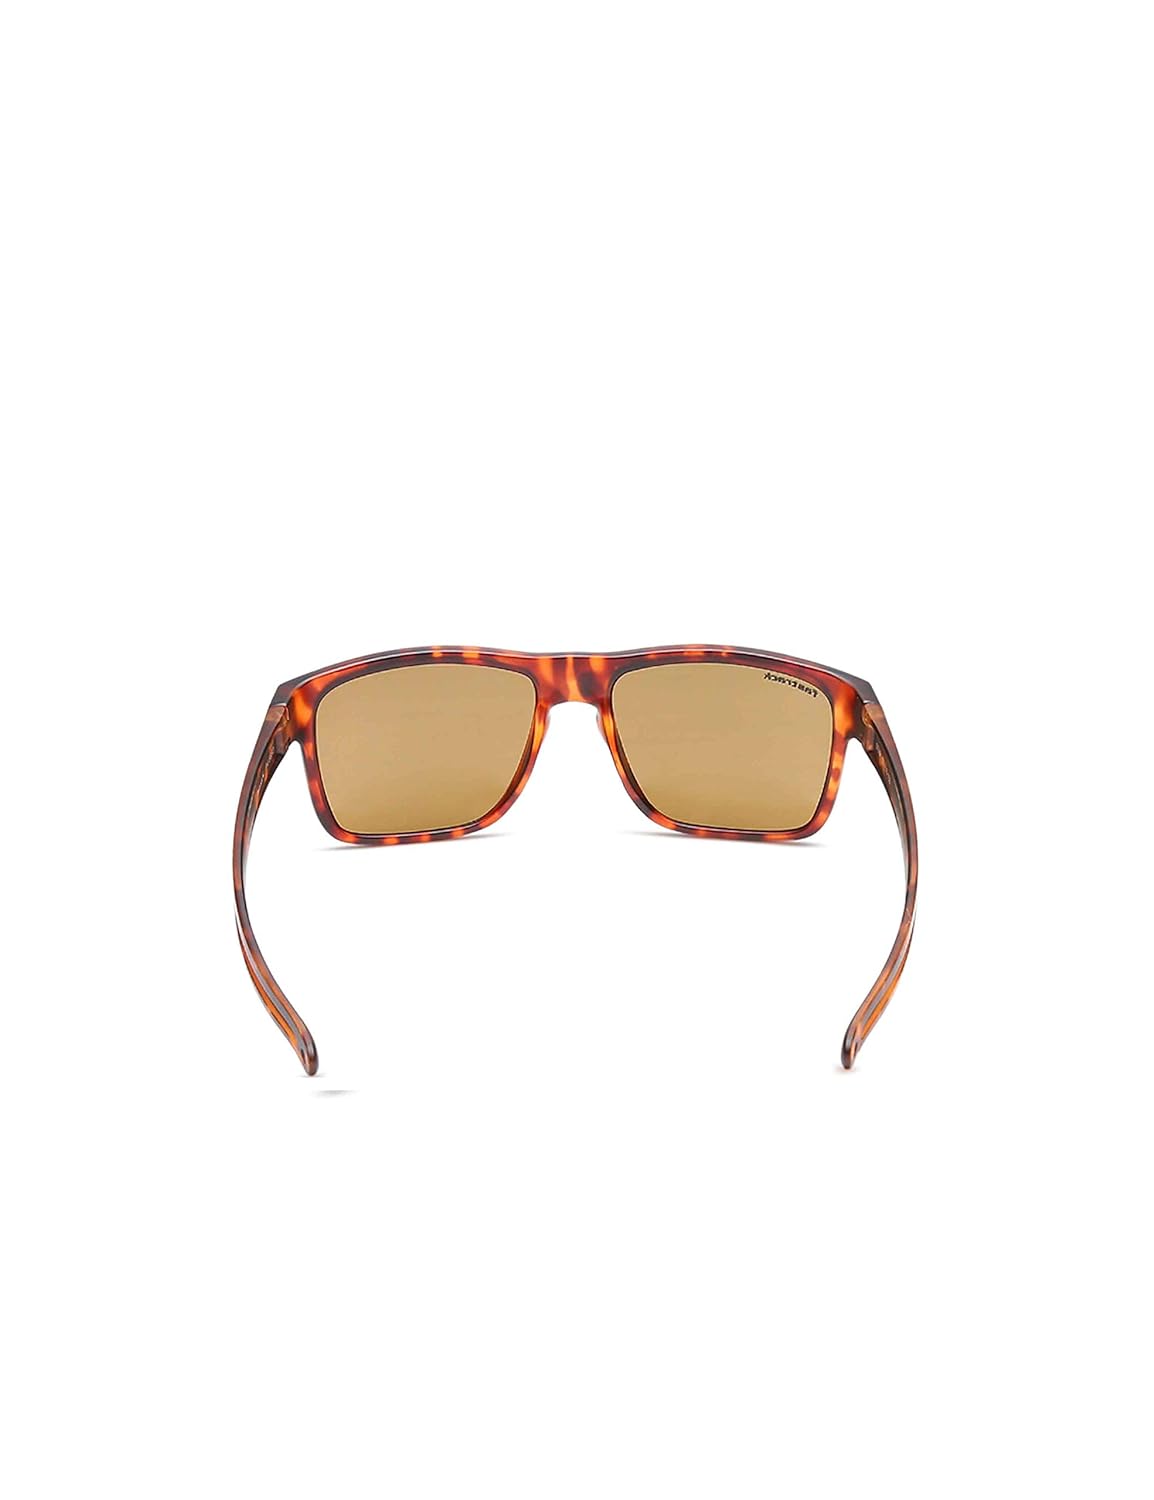 Fastrack UV Protected Square Men's Sunglasses - (P415BR3|56|Brown Color Lens) 